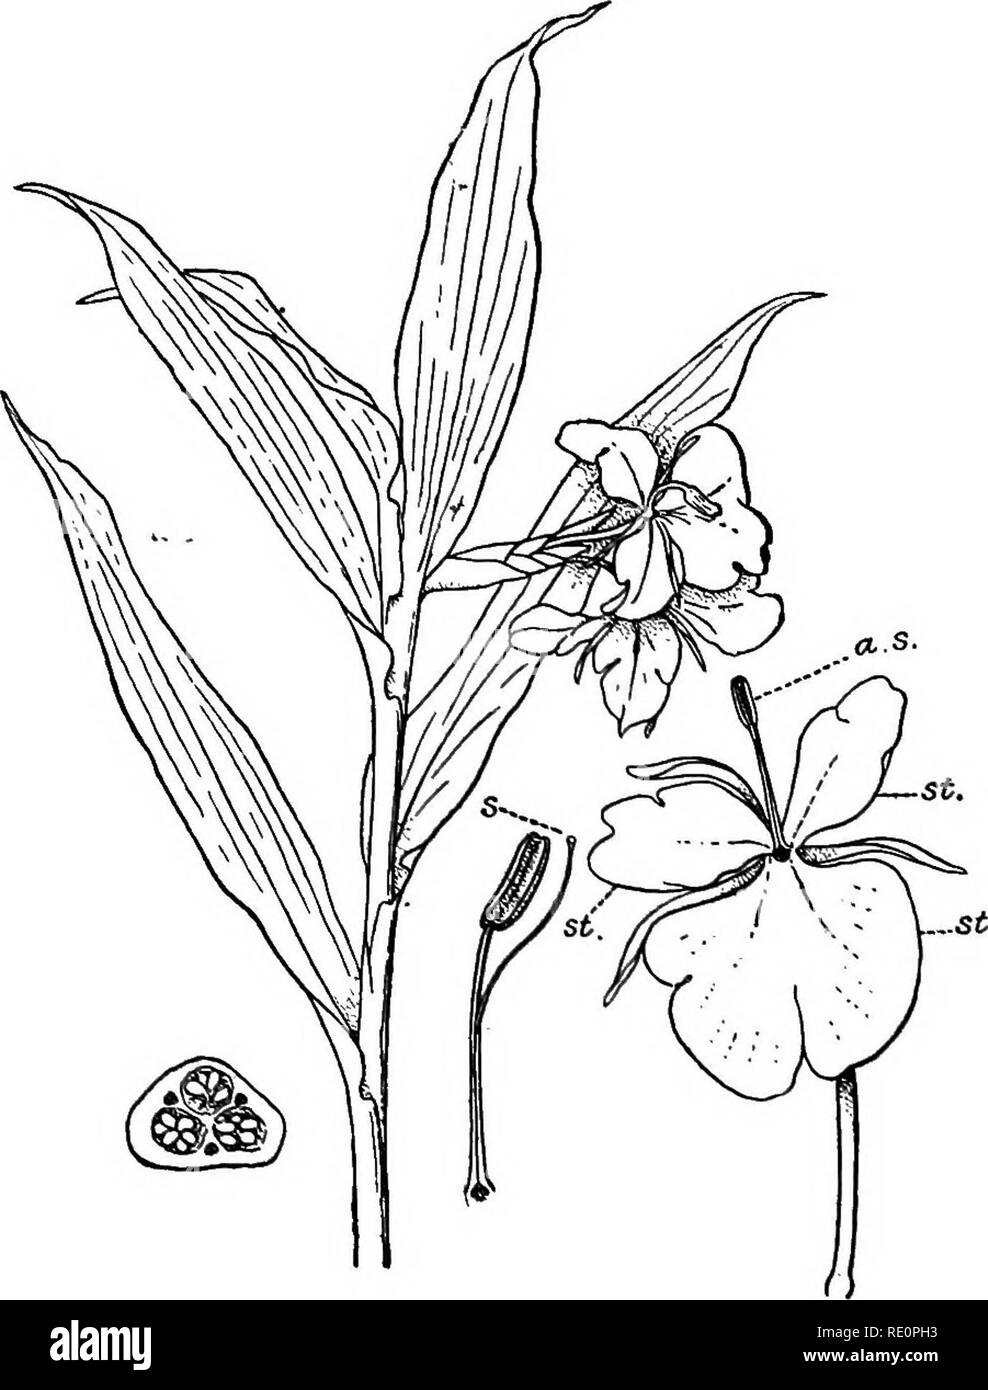 . A manual of Indian botany. Botany. PETALOIDE^ 289 of which are converted into bulbils, as in Globba bul- btfera (see fig. 23). Some species of Curcuma, as. Fig. a6a.—Dulal-champa {Hedychium coronarmm) si. Staminodia. ., Style and stigma taken out of the groove of the anther. U.S., Anther embracing stigma and style. sathi {Curcuma zeodoria), yield an inferior kind of Arrowroot. GastrocMlus longiflora is a stemless herb of Chhota Nagpur. 2. Marantacece or G7«7^«ce&lt;^.—Similar to Zingiber- (0945) 2°. Please note that these images are extracted from scanned page images that may have been digit Stock Photo